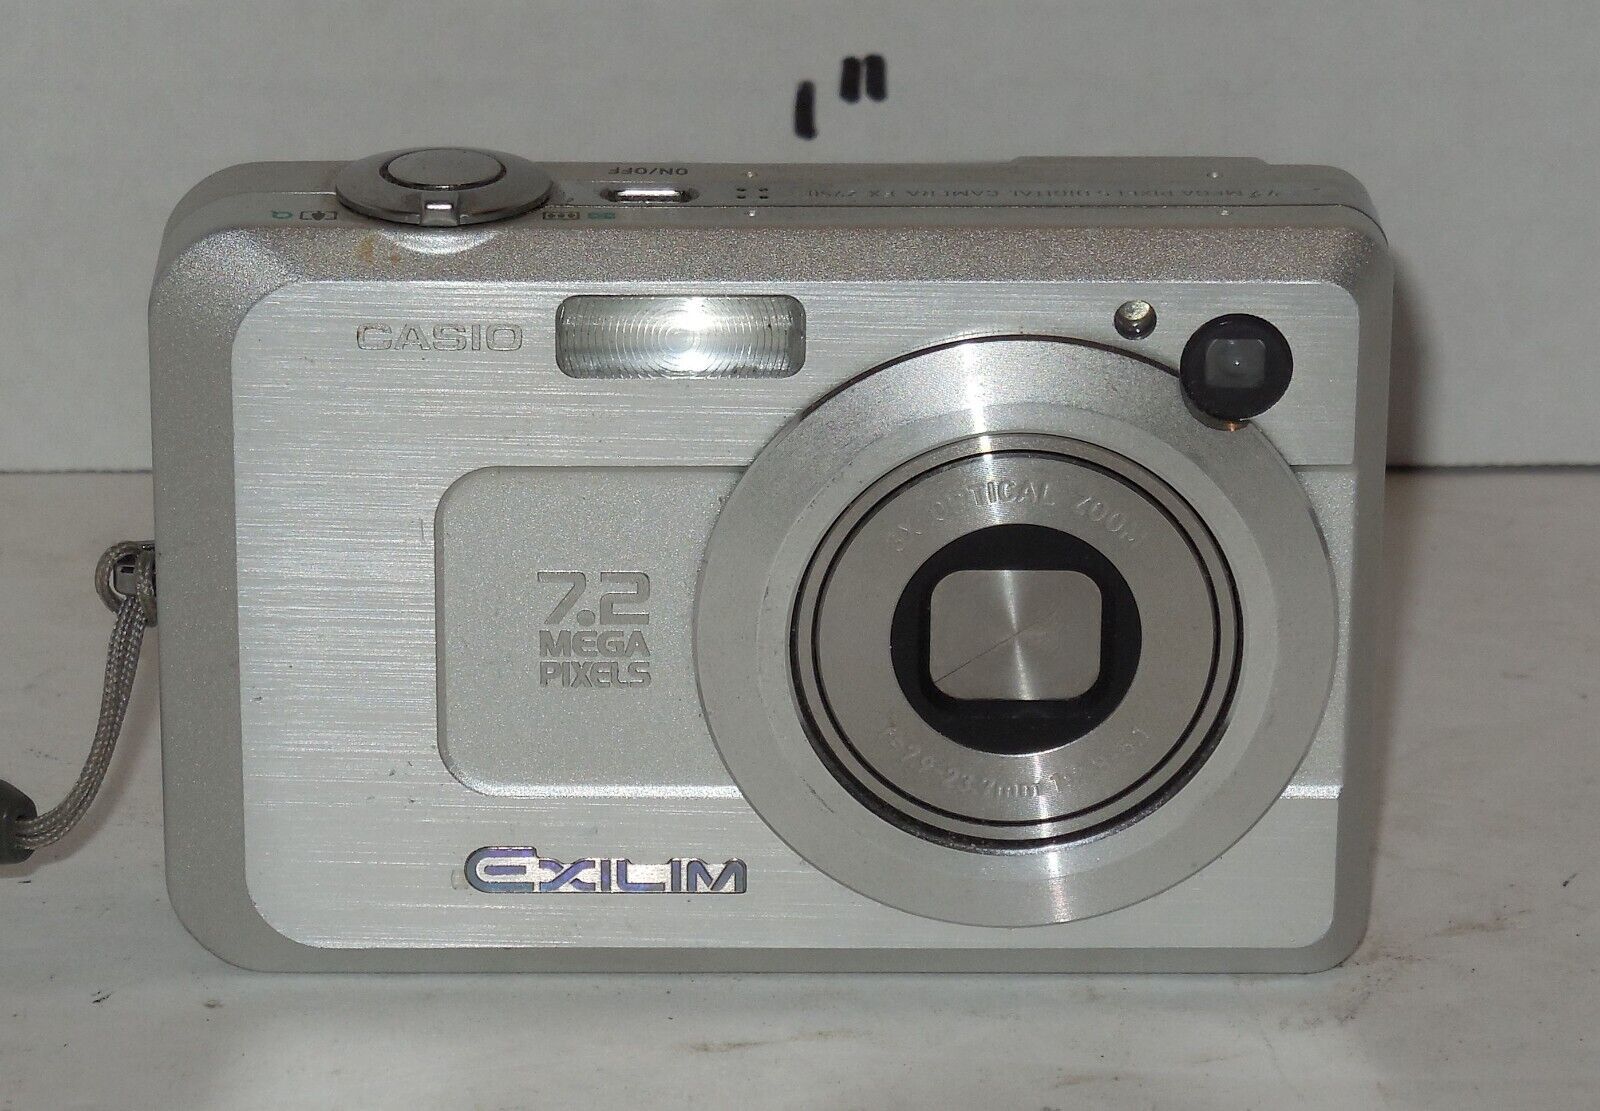 Primary image for Casio EXILIM ZOOM EX-Z750 7.2MP Digital Camera - Silver Tested Works